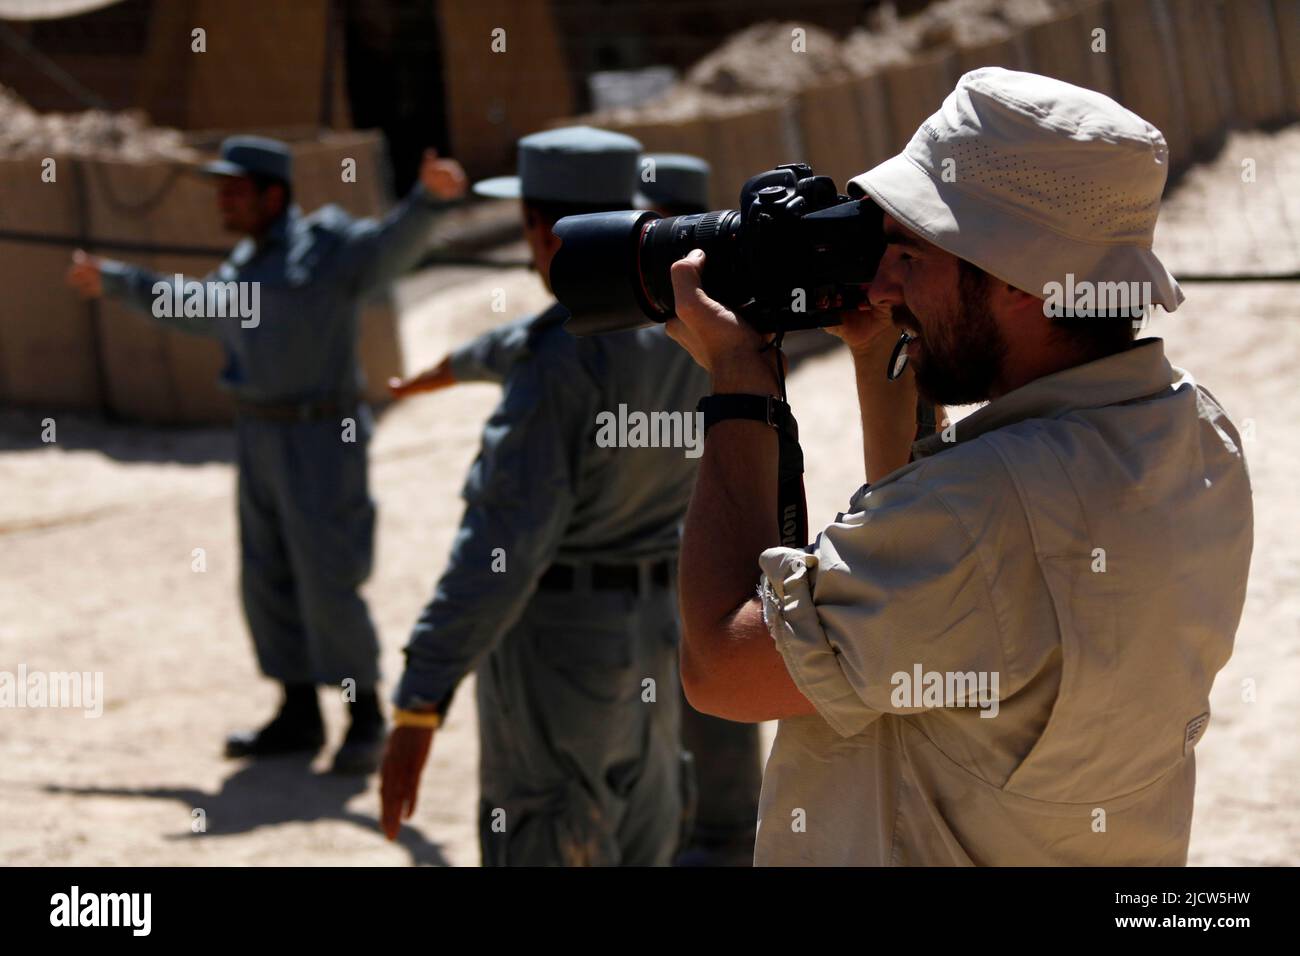 Ben Foley, camera man with Al Jazeera English News Channel films local Afghan Uniformed Police during a physical training session alongside U.S. Marin Stock Photo